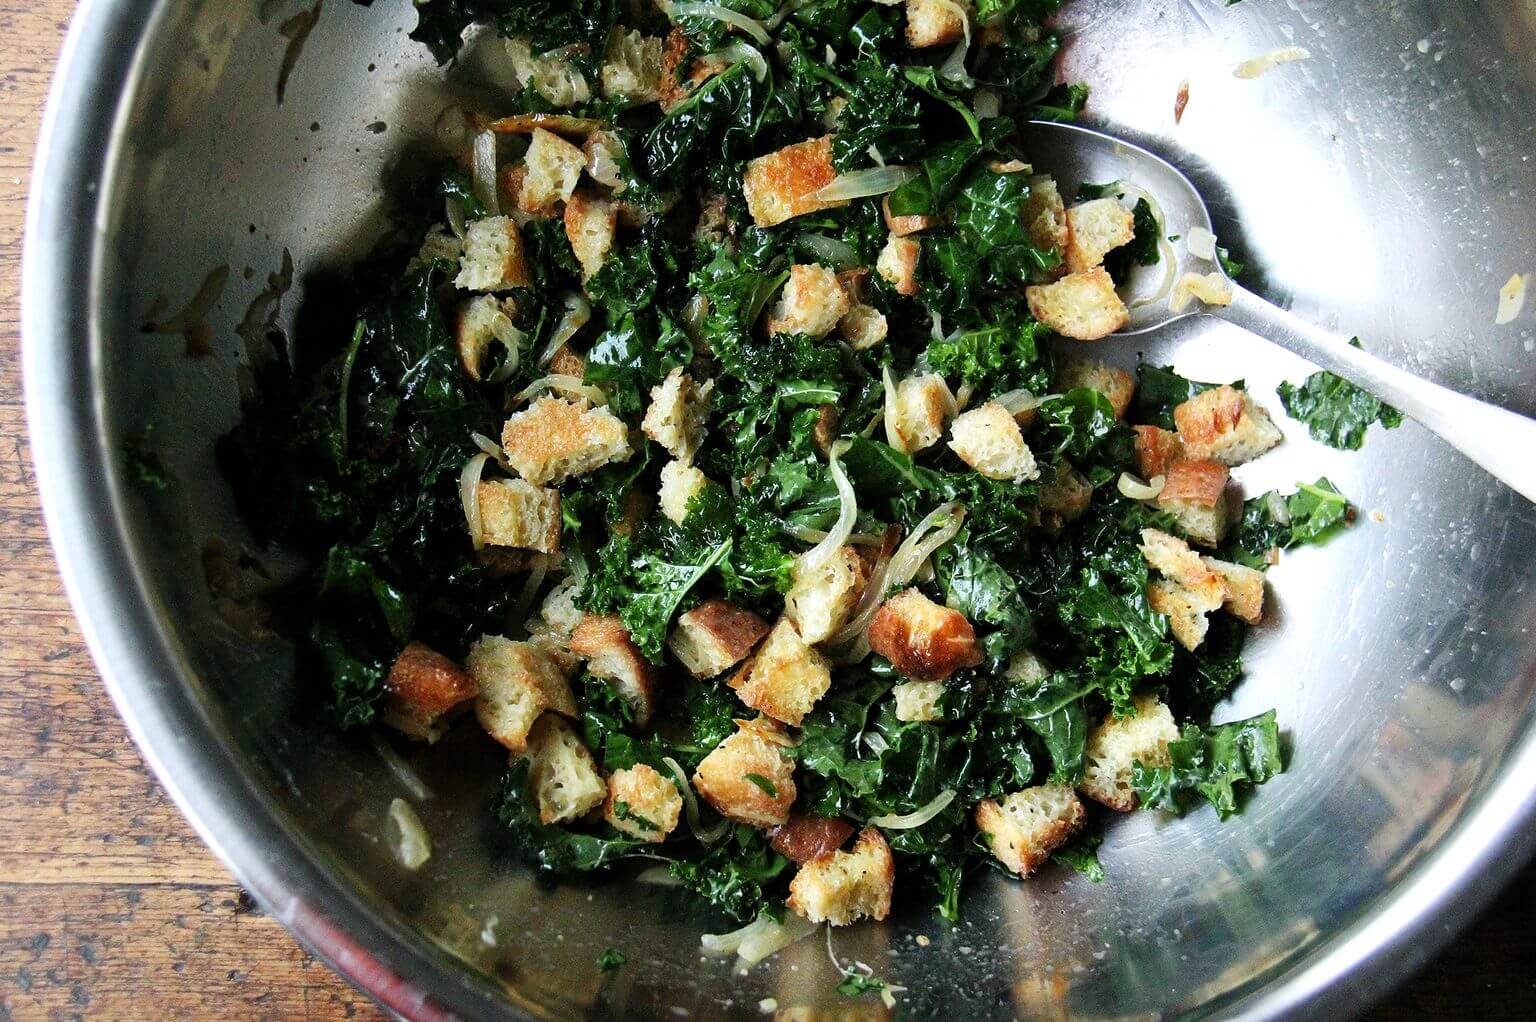 A large bowl filled with toasted cubes of peasant bread tossed with kale and caramelized onions.